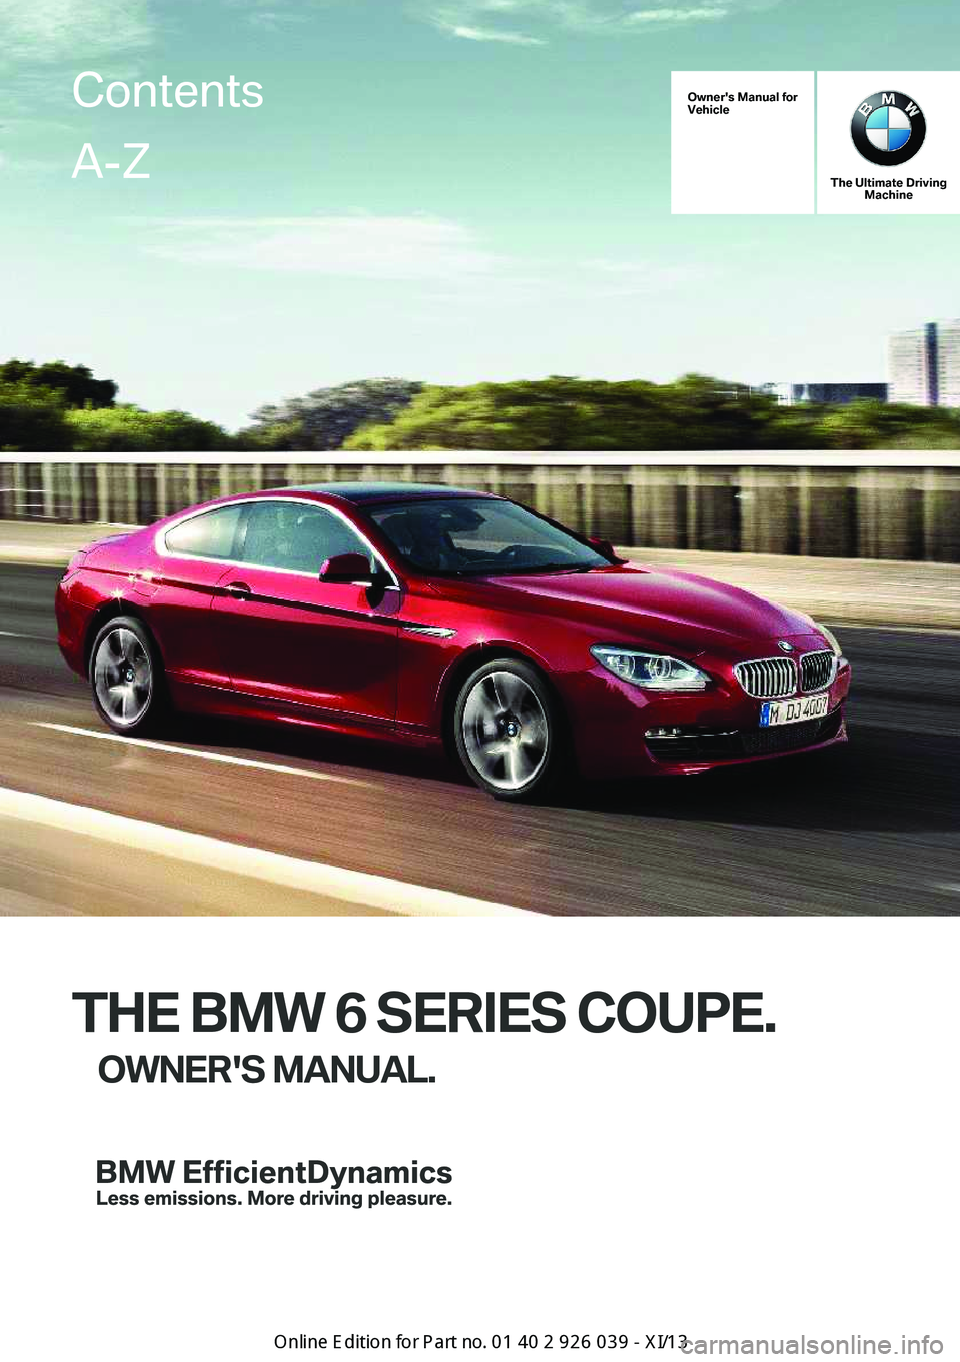 BMW 6 SERIES COUPE 2013 F13 Owners Manual Owner's Manual for
Vehicle
The Ultimate Driving Machine
THE BMW 6 SERIES COUPE.
OWNER'S MANUAL.
ContentsA-Z
Online Edition for Part no. 0140 2 910 771 - VI/13   